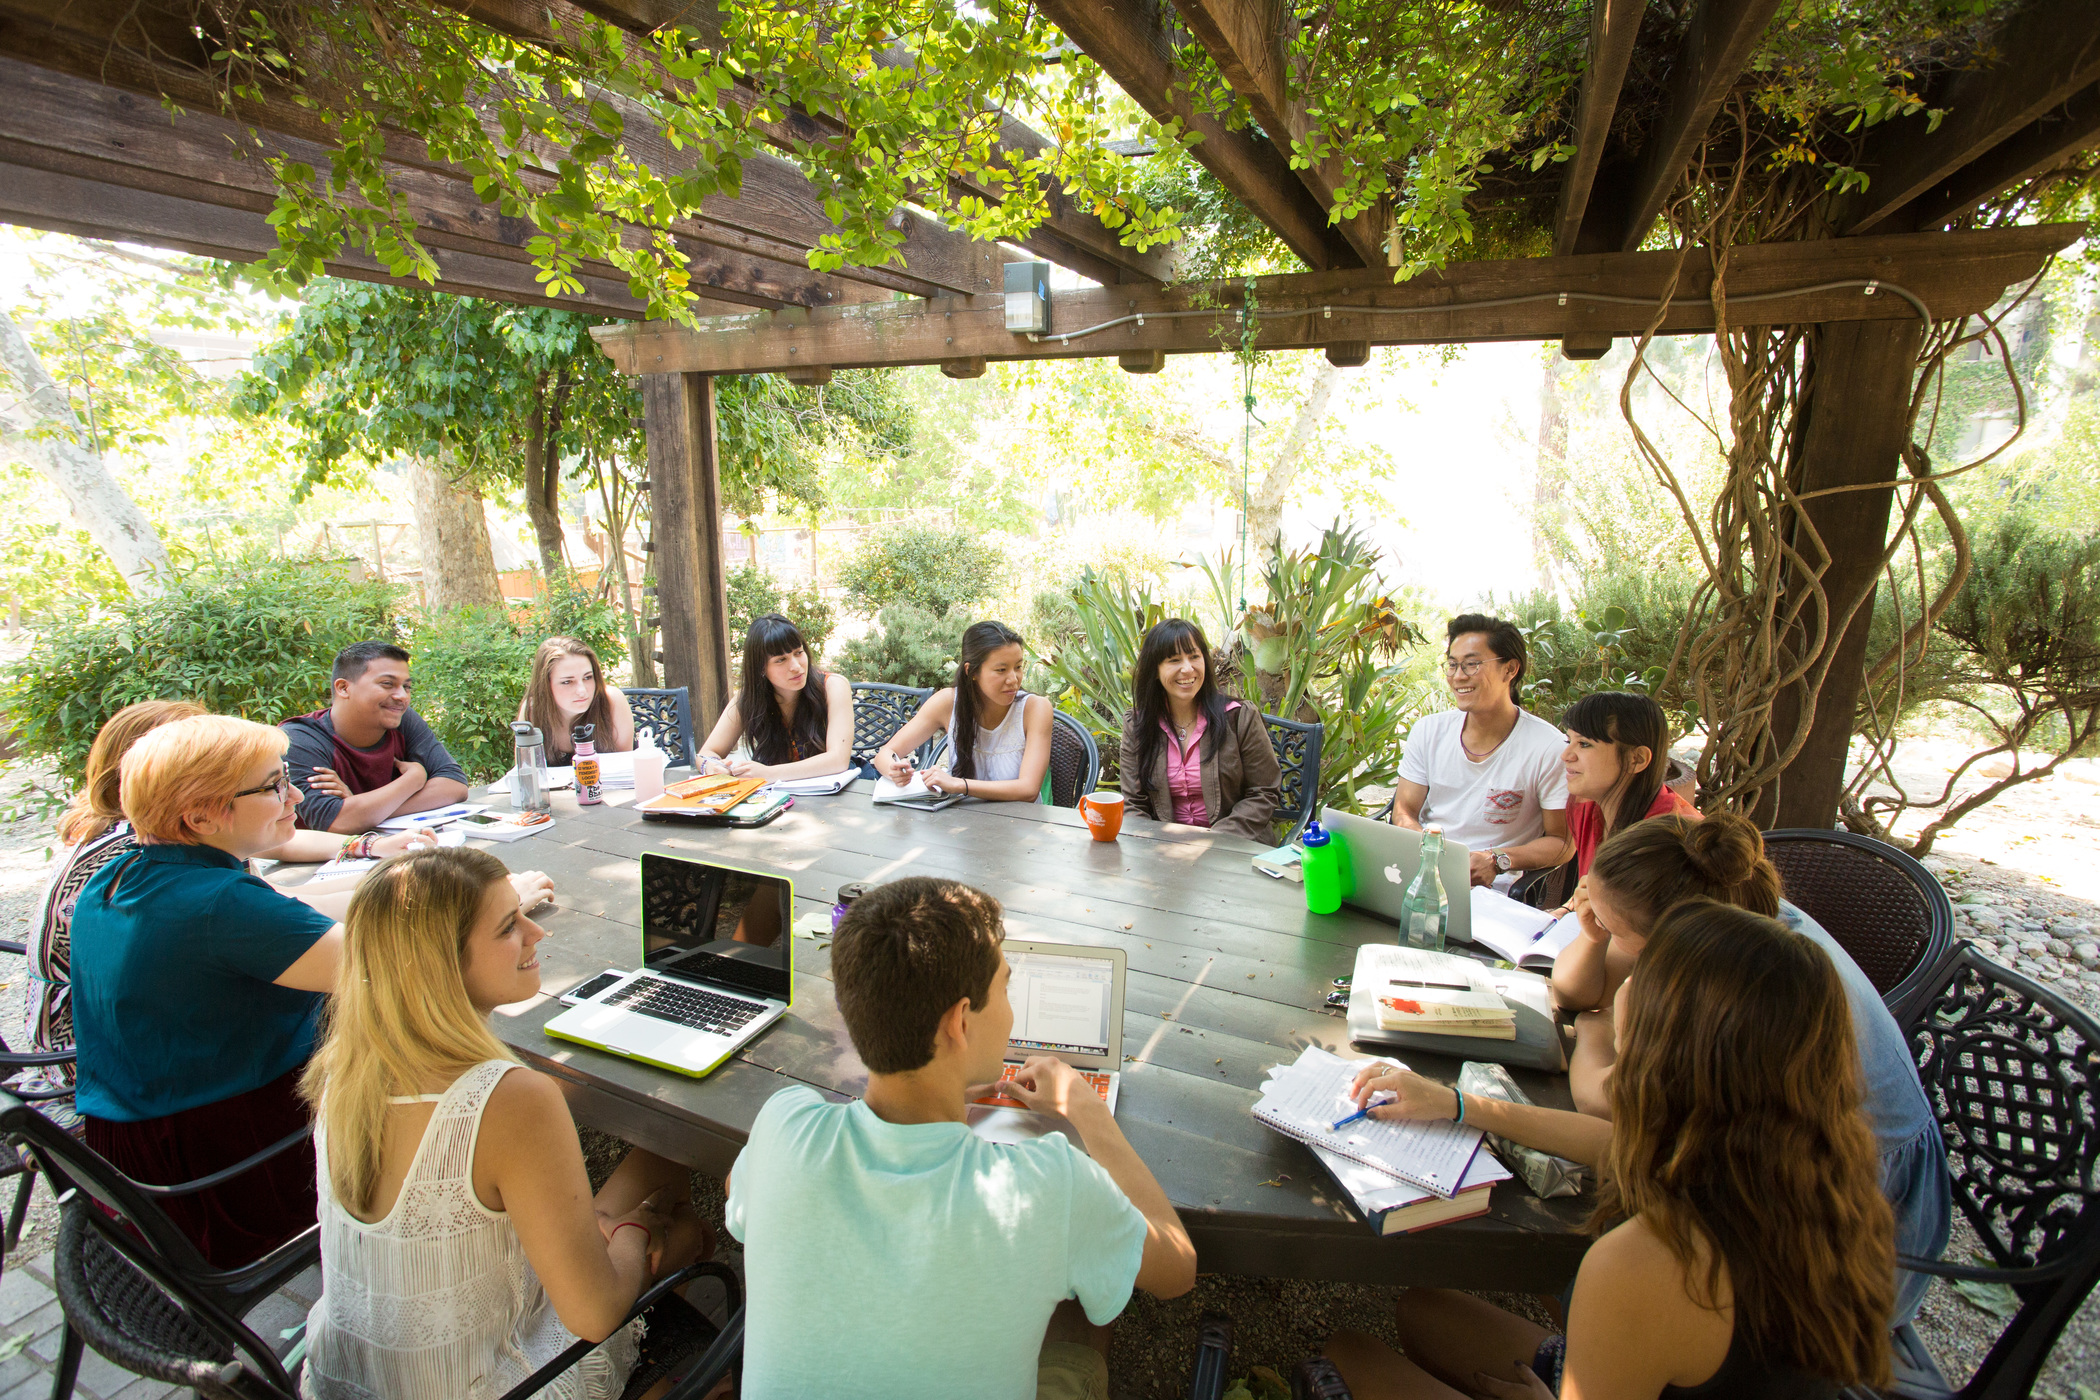 Roberta Espinoza, associate professor of sociology, with students in the outdoor classroom south of the Grove House.